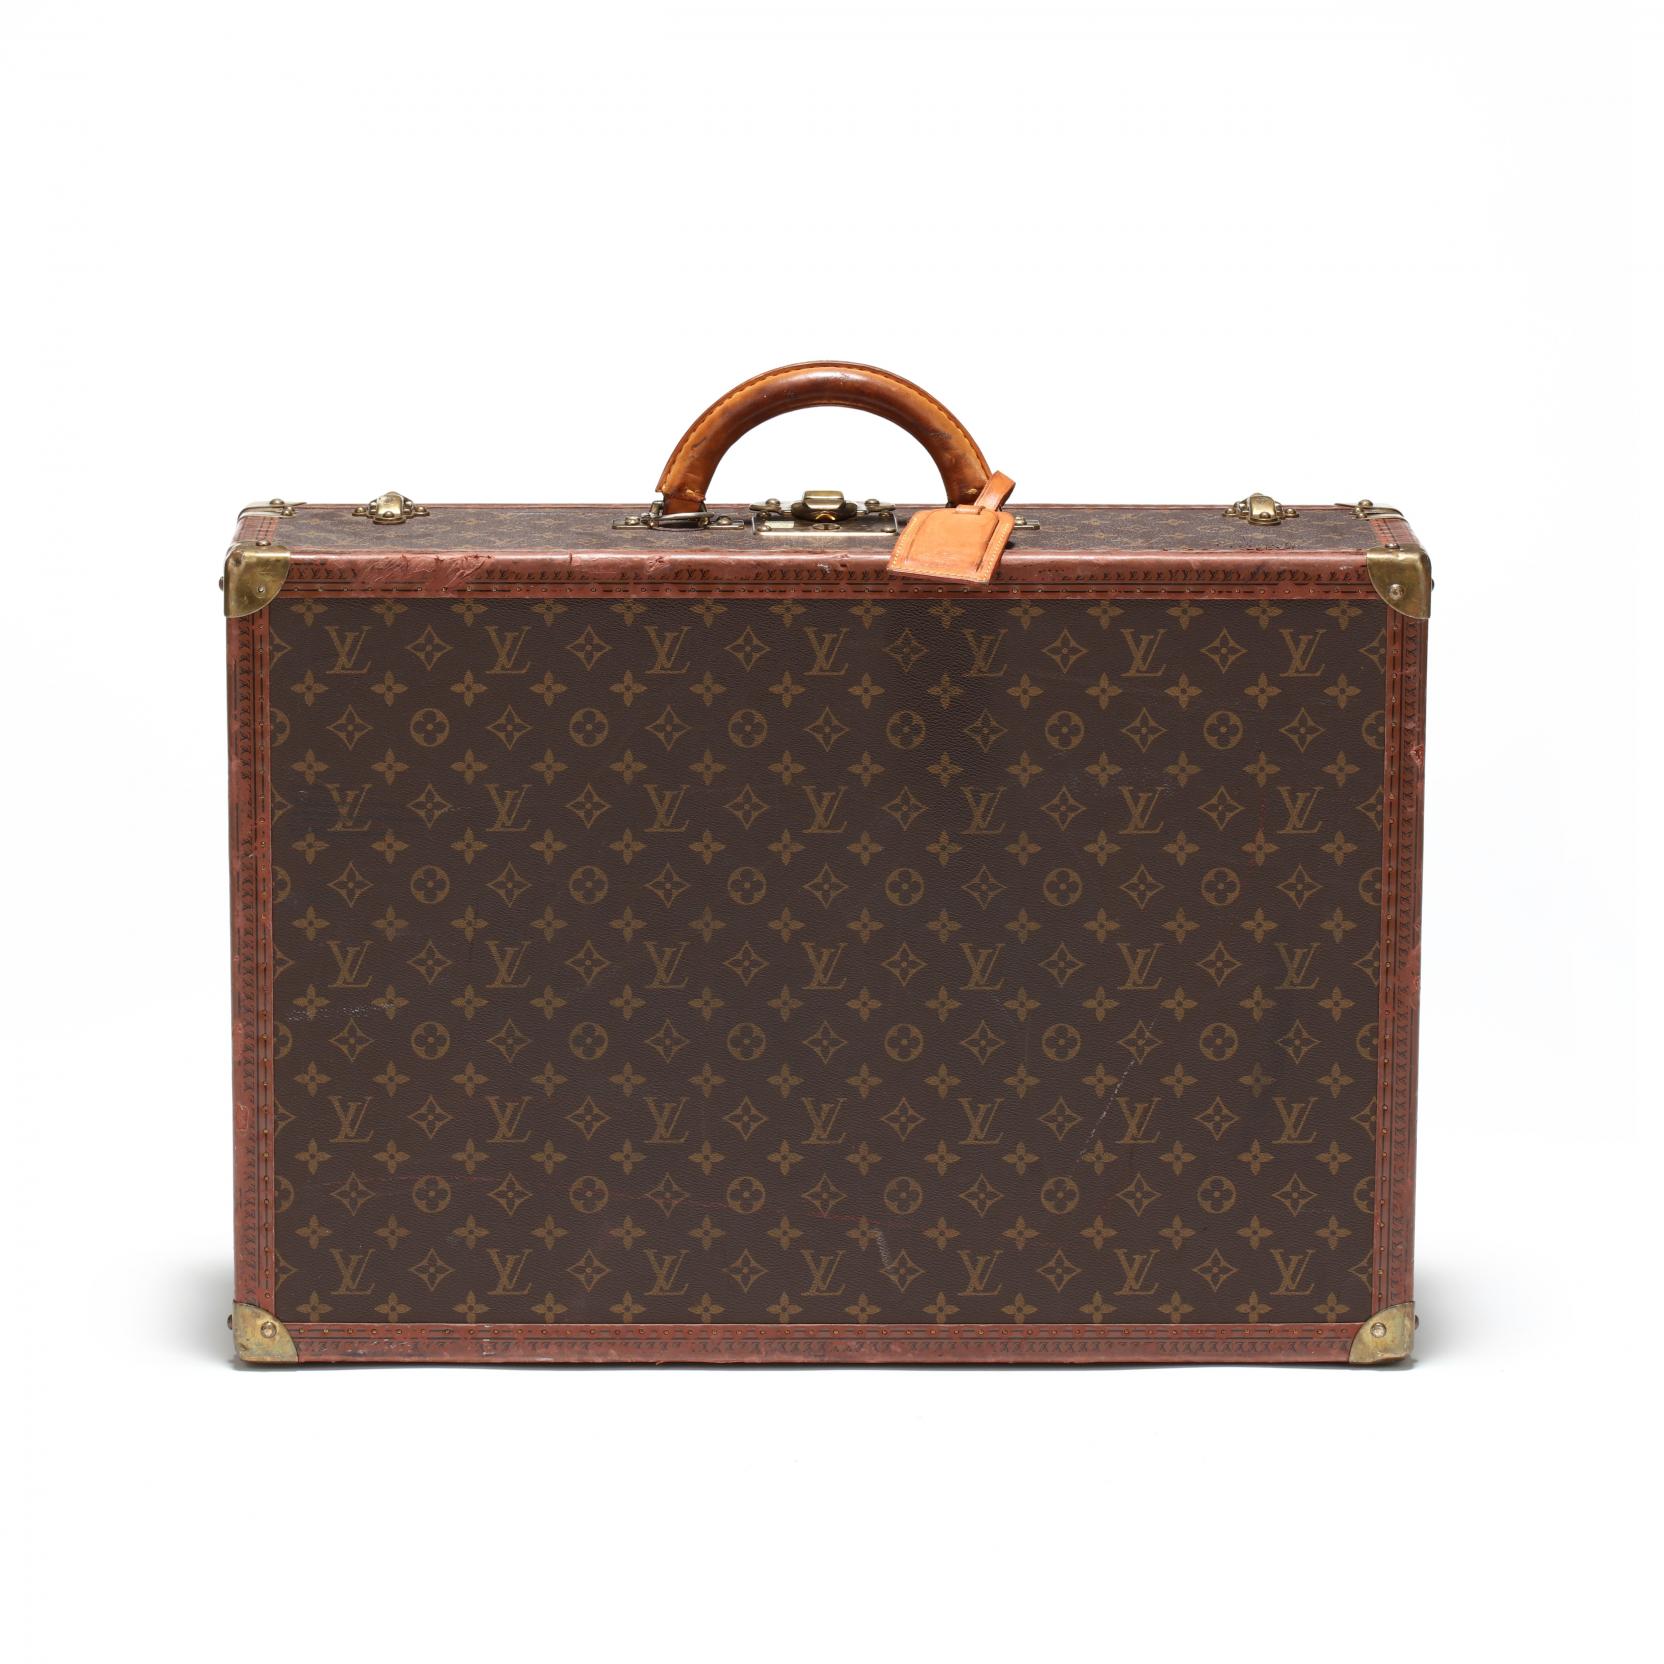 Hard Sided Suitcase Bisten 7, Louis Vuitton (Lot 123 - The Fall Quarterly  Auction featuring The Collection of Esther B. Ferguson, Secessionville  Manor, SCSep 16, 2017, 10:00am)